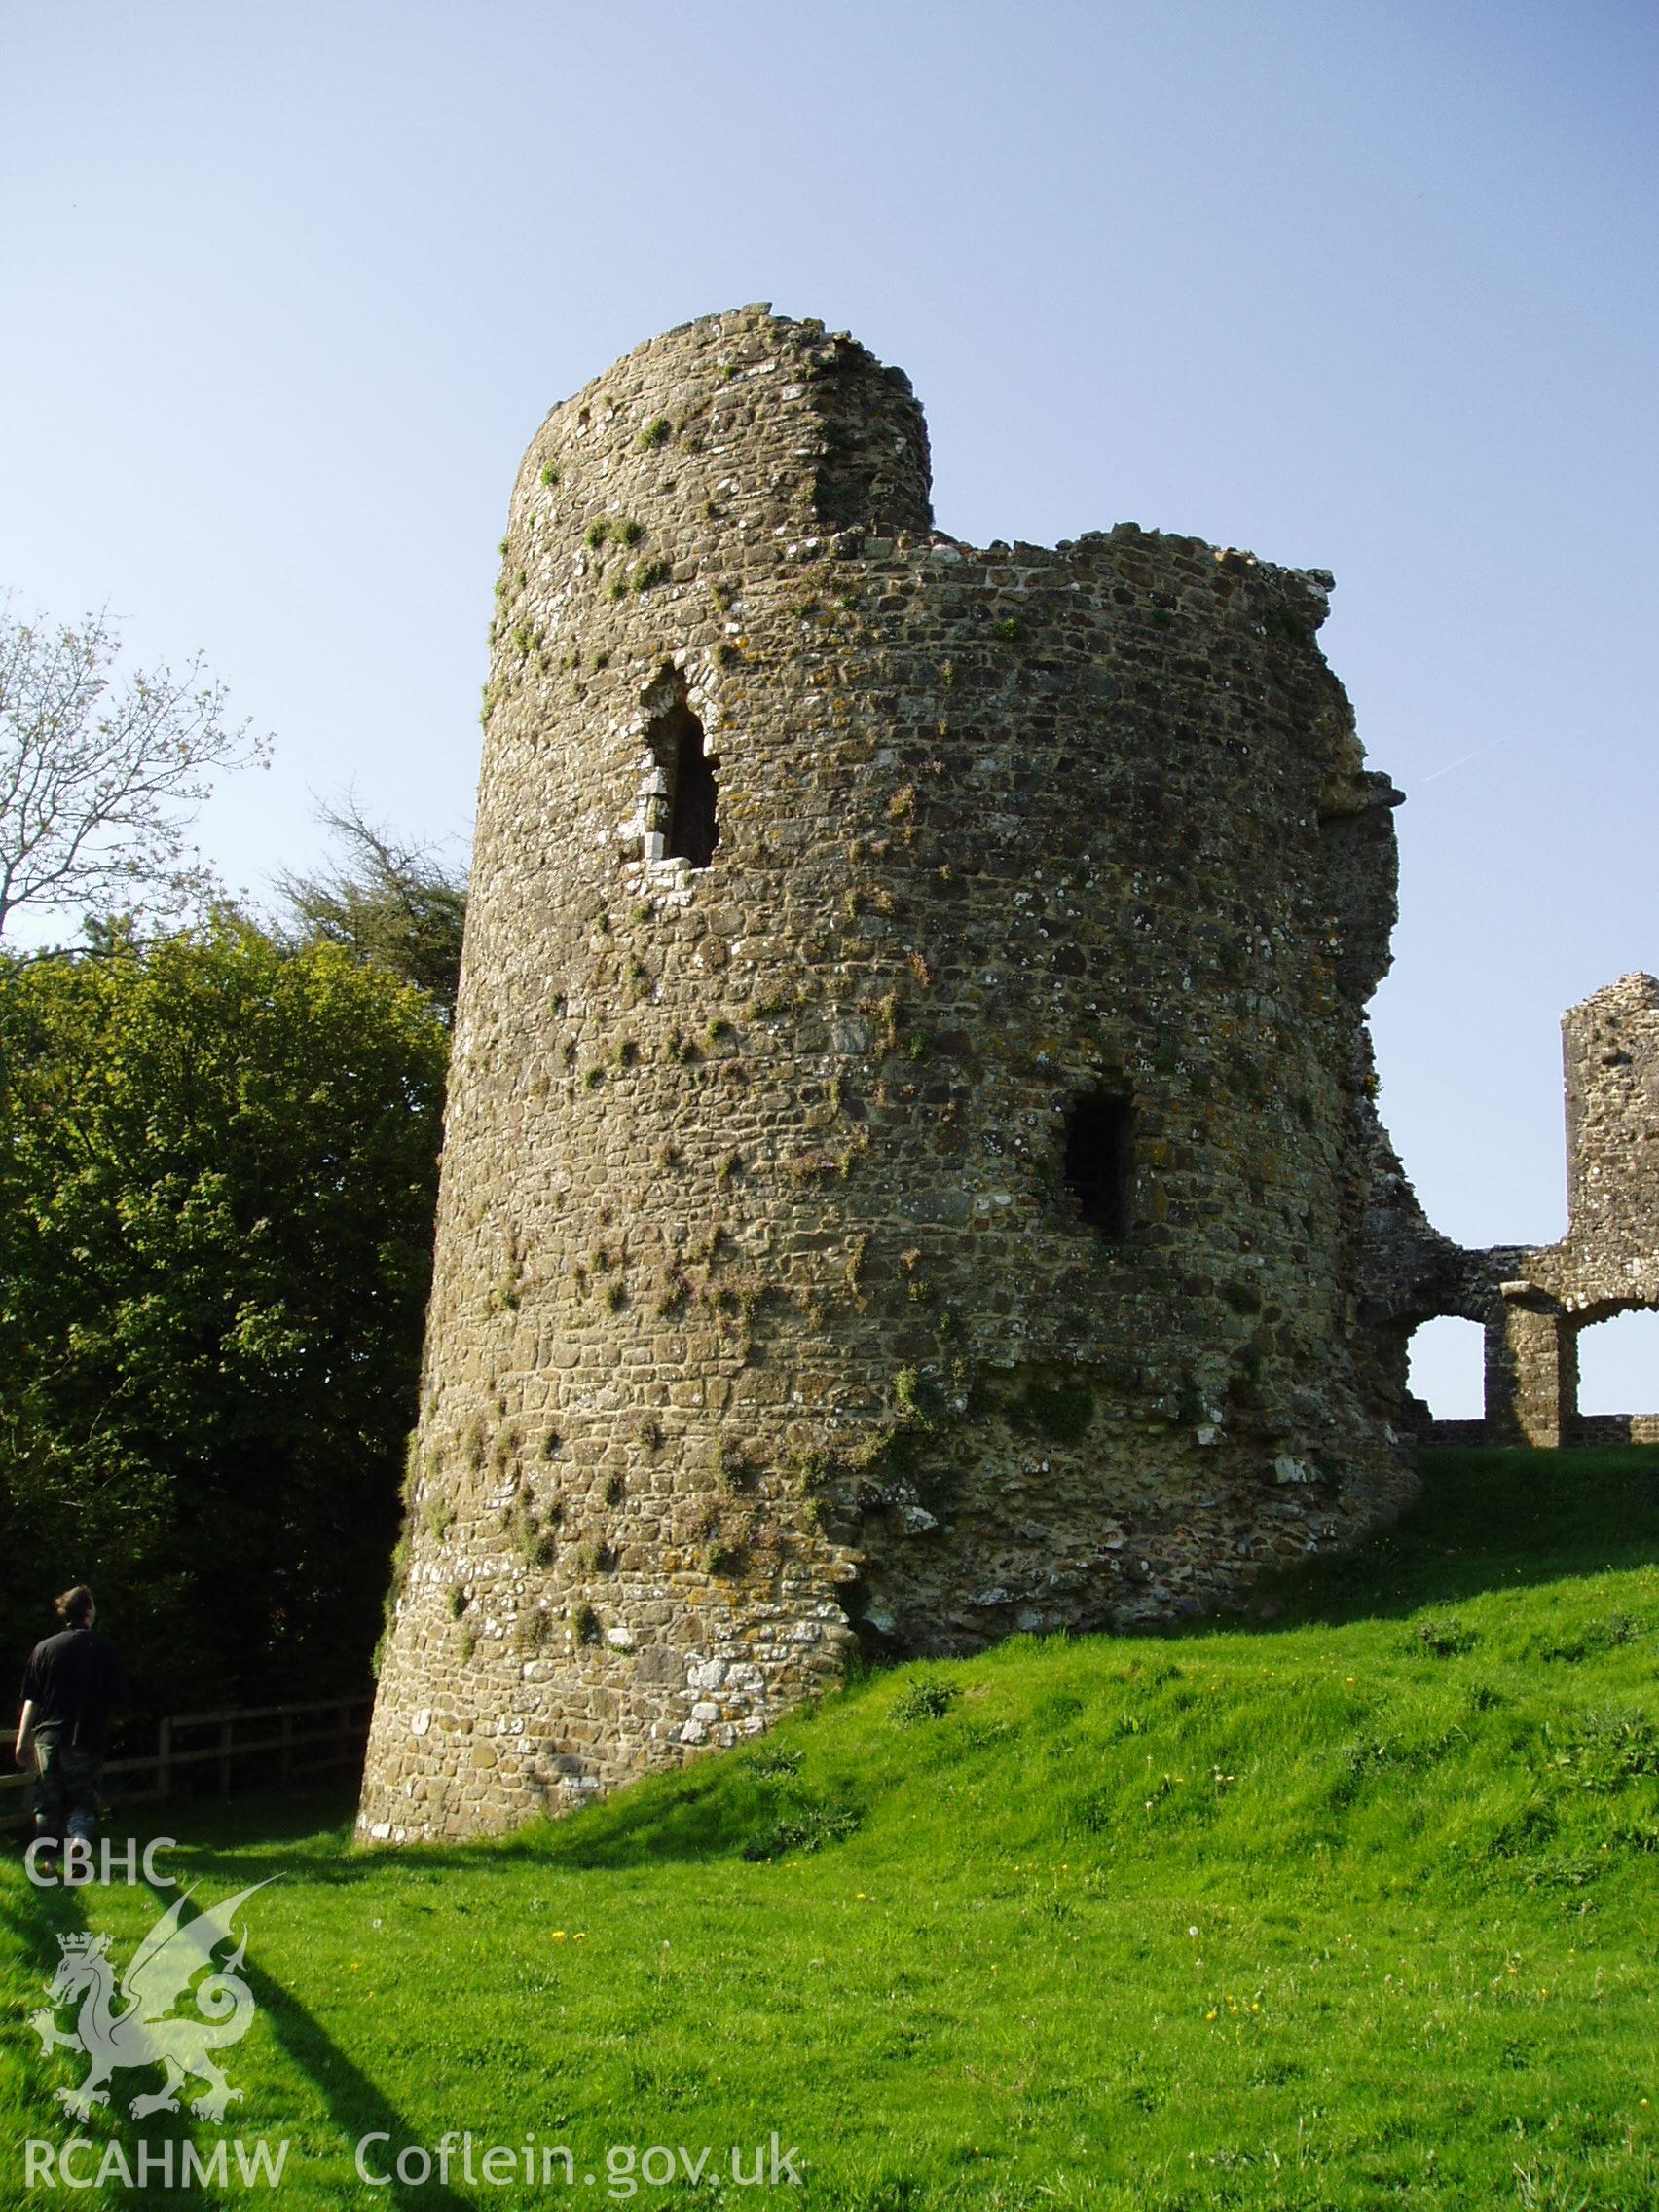 Colour digital photograph showing Narberth Castle taken by Phil Kingdom, 2008.